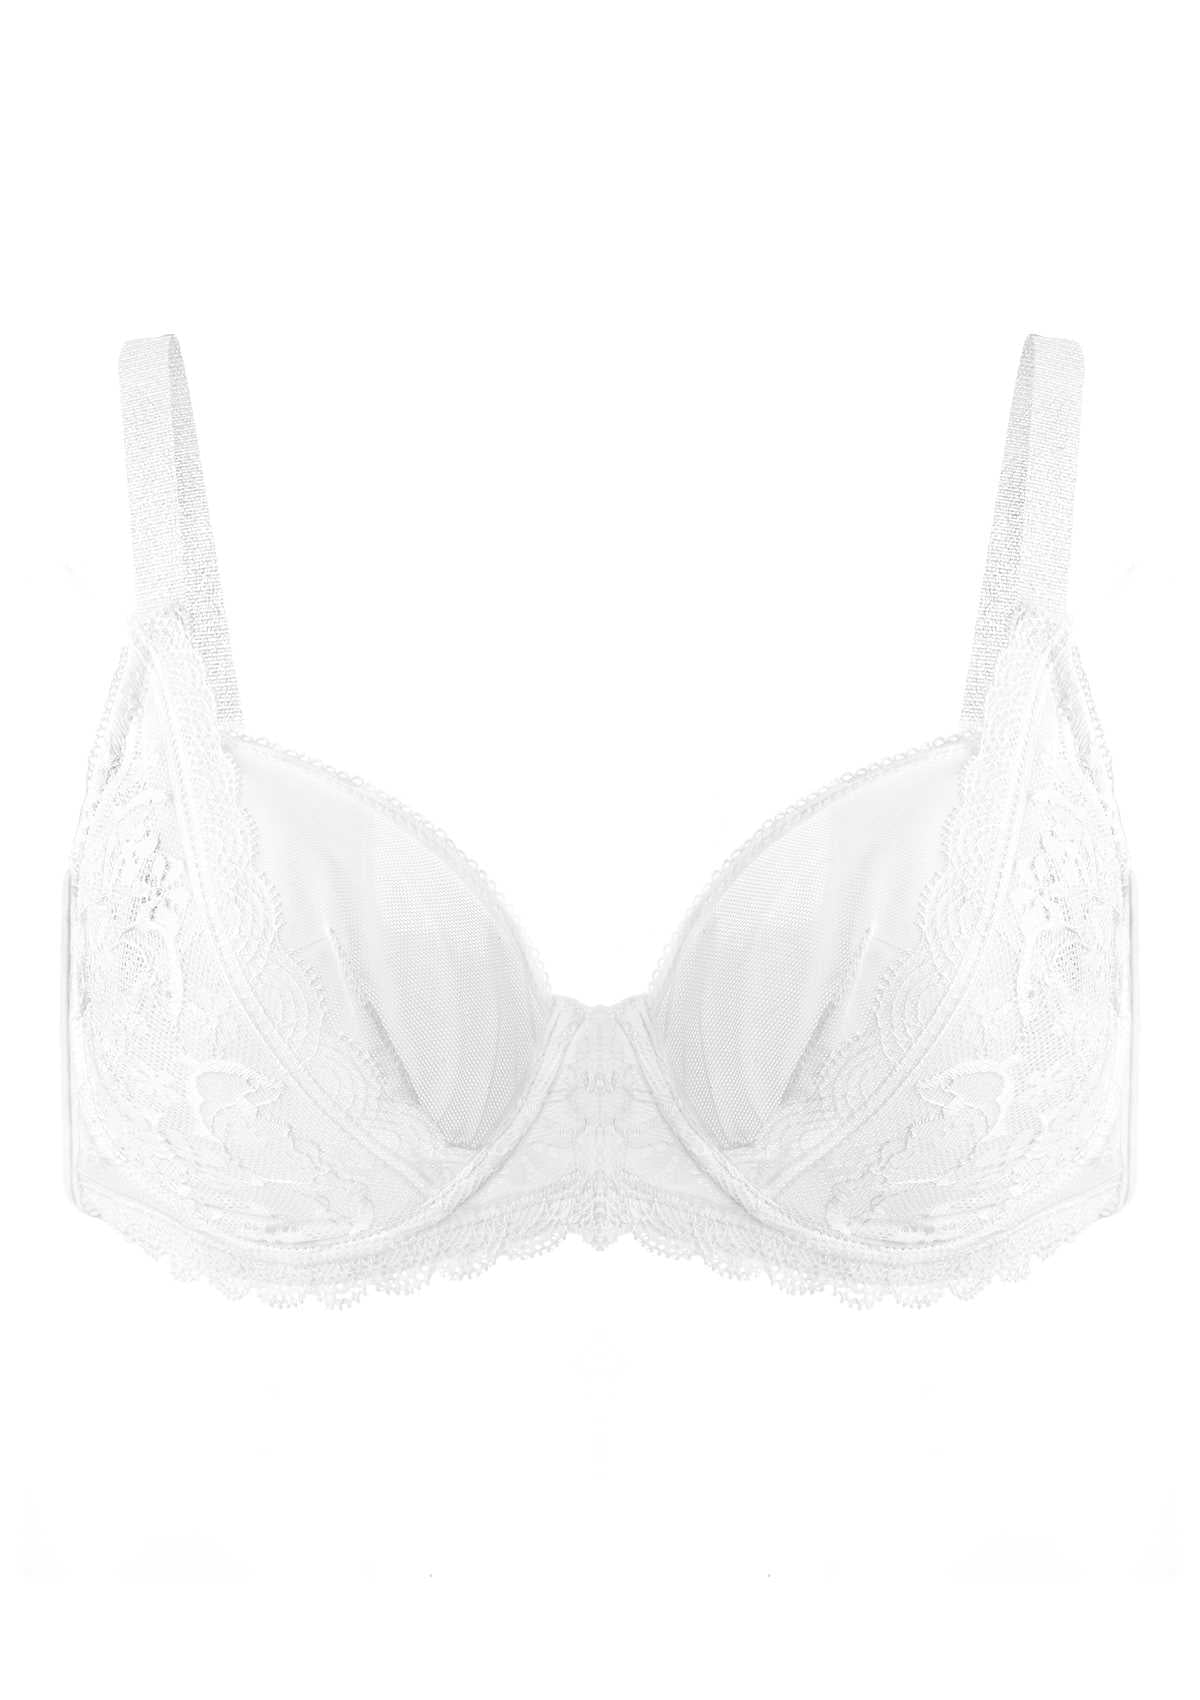 HSIA Anemone Big Bra: Best Bra For Lift And Support, Floral Bra - White / 42 / C